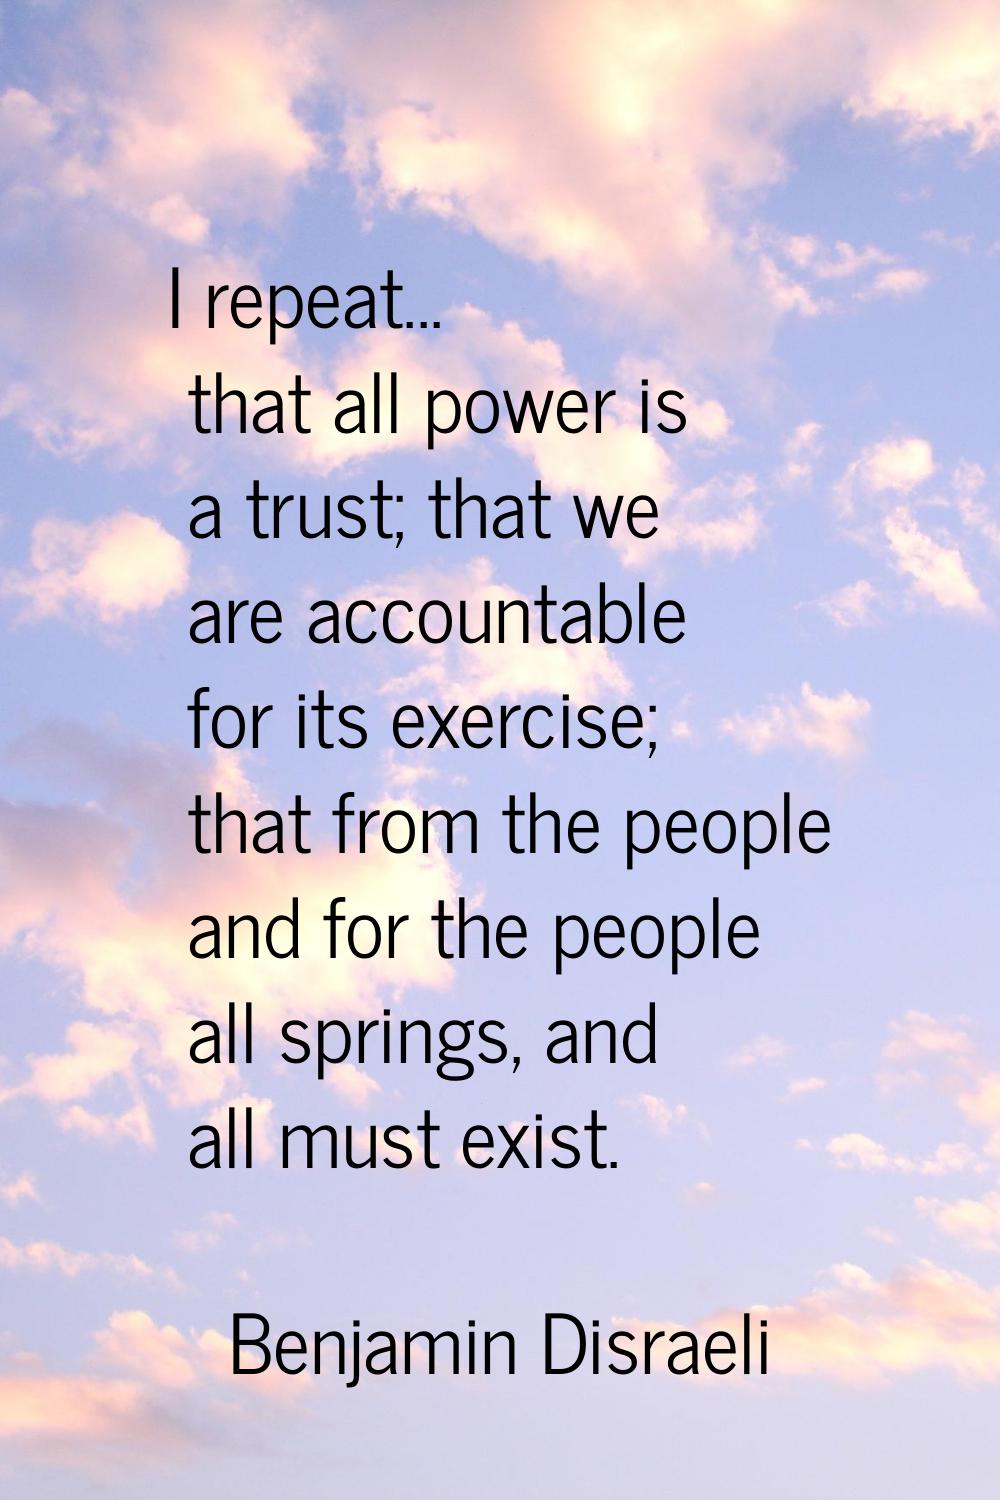 I repeat... that all power is a trust; that we are accountable for its exercise; that from the peop